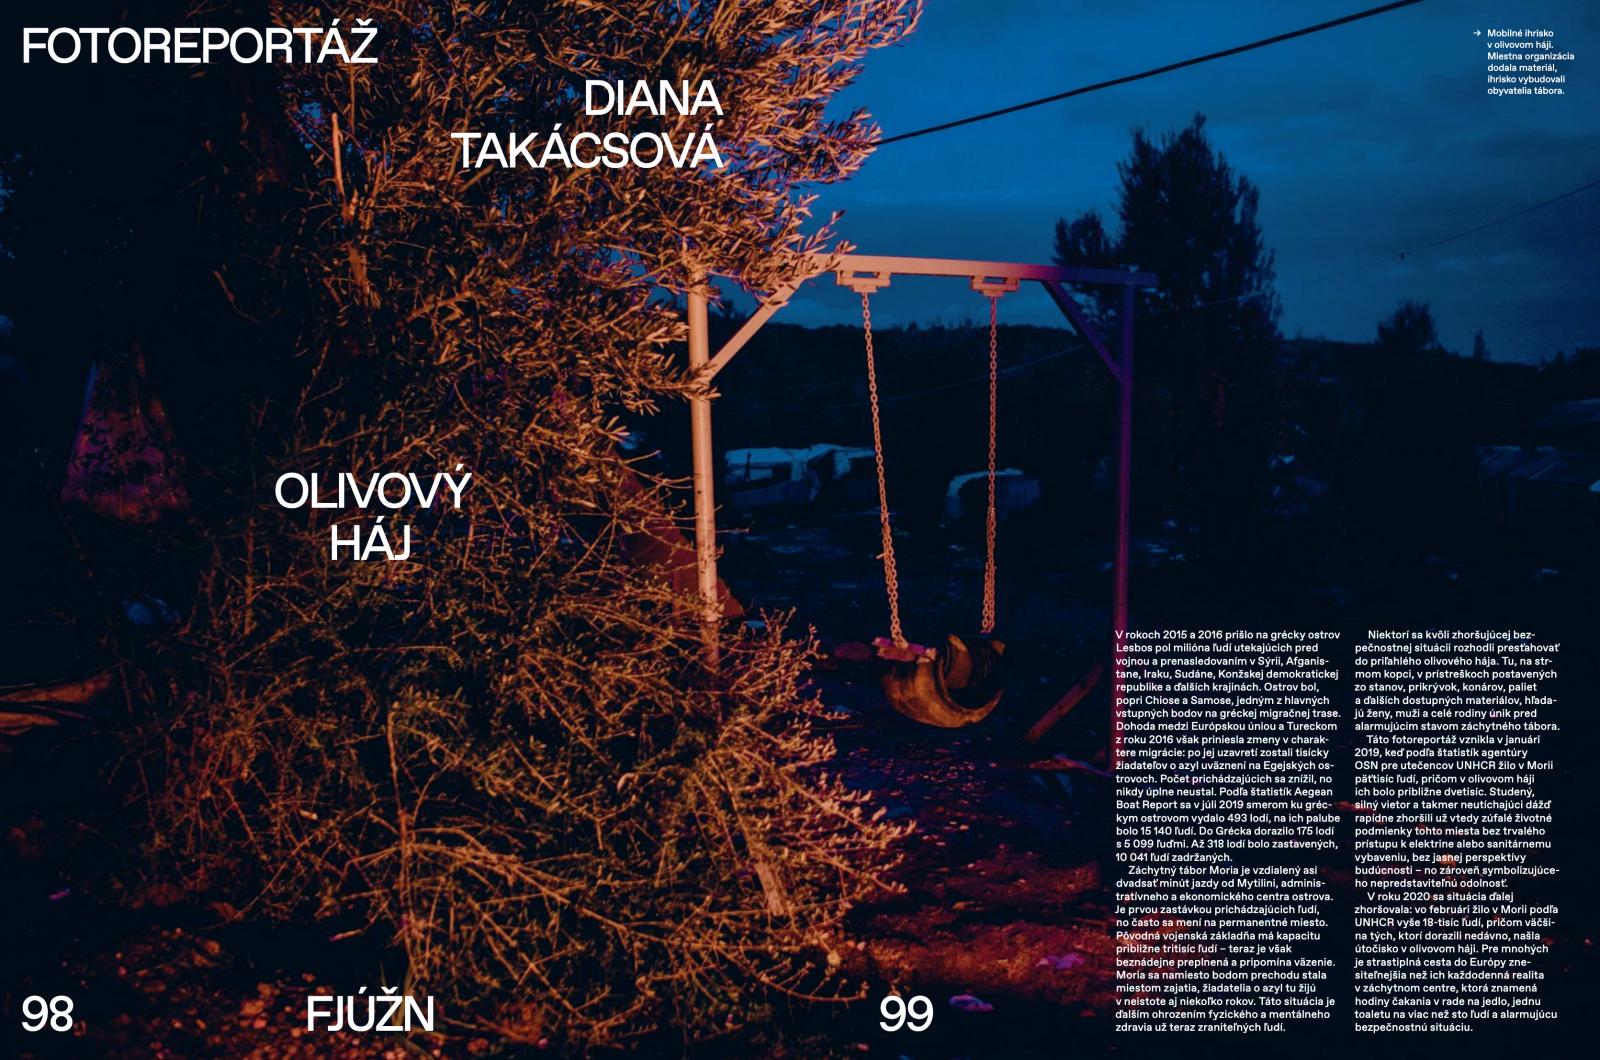 The Olive Grove in this year's [fjuzn] festival magazine